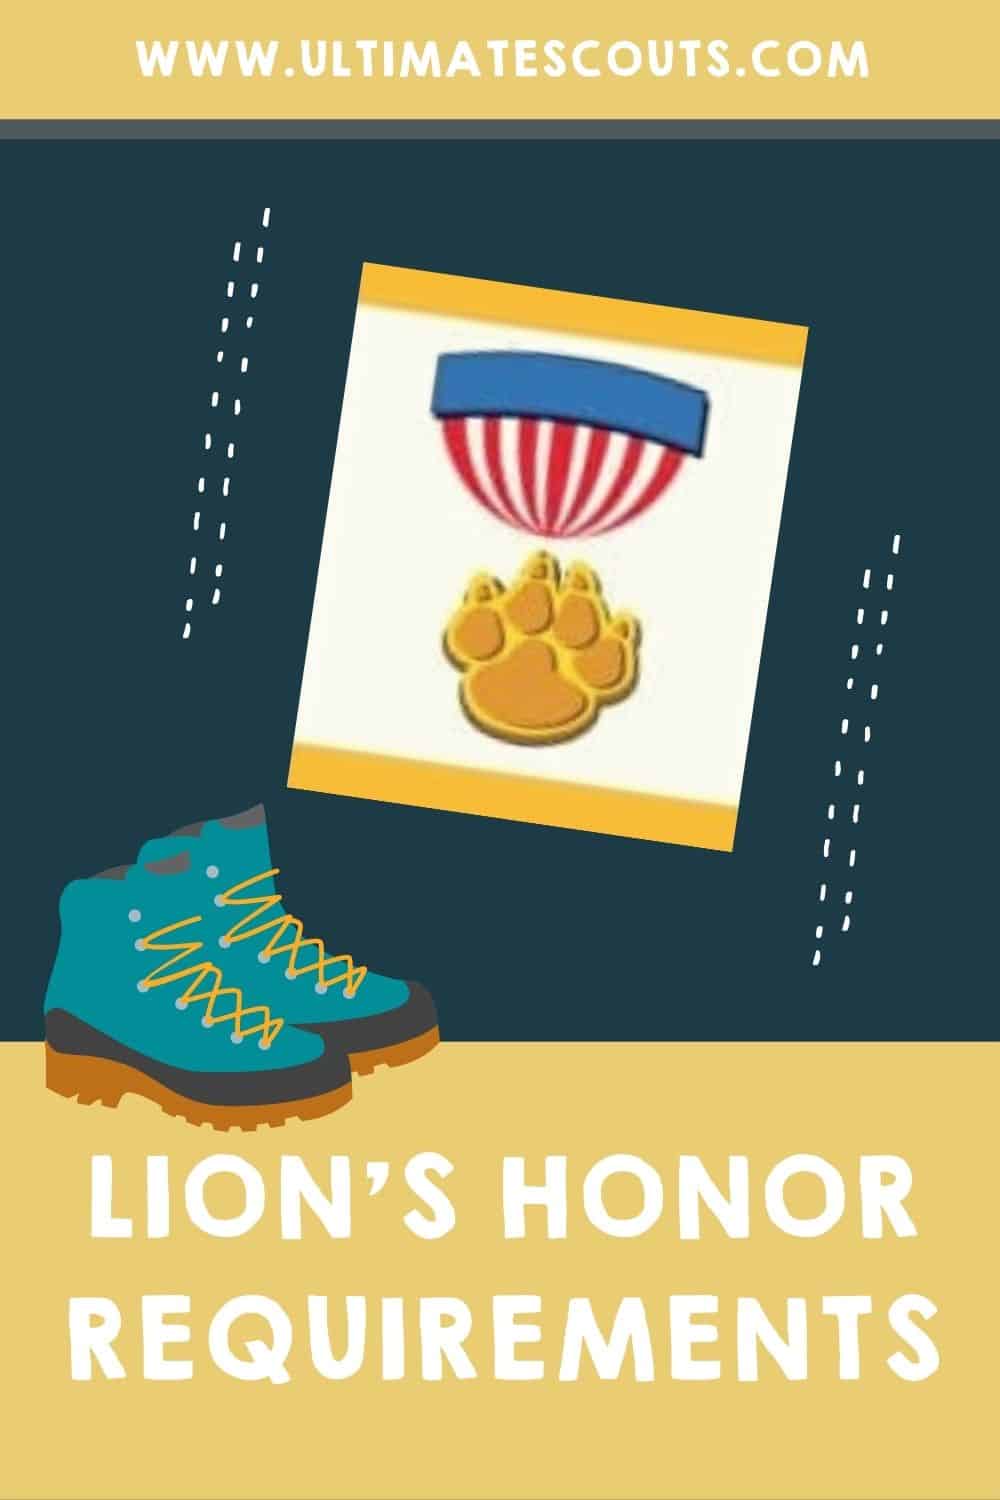 Lion’s Honor for Cub Scouts